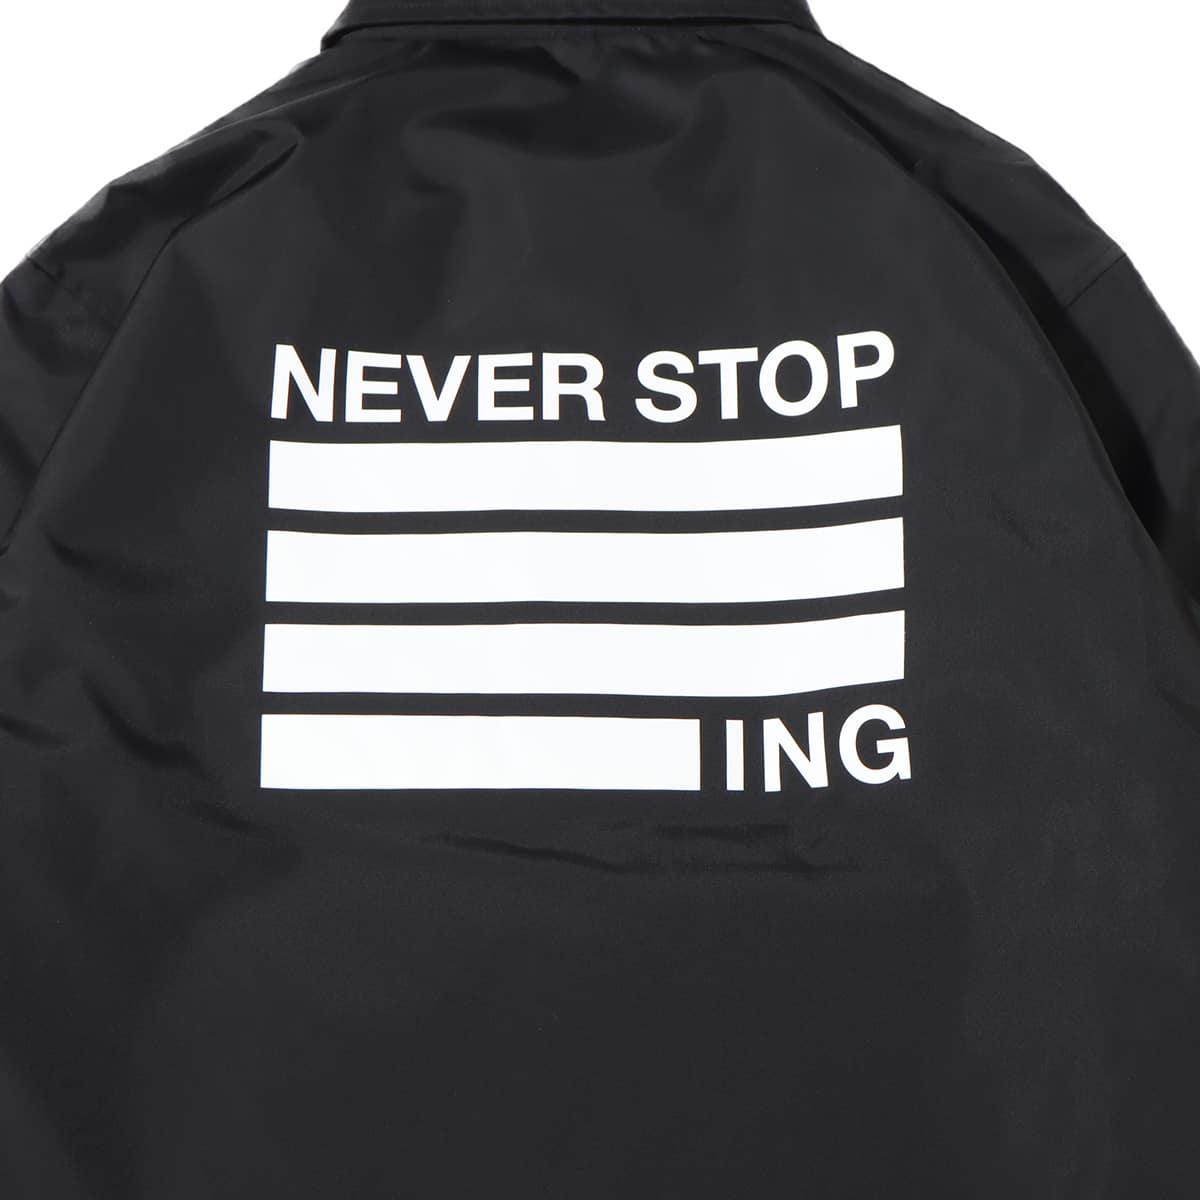 THE NORTH FACE NEVER STOP ING THE COACH JACKET BLACK 24SS-I